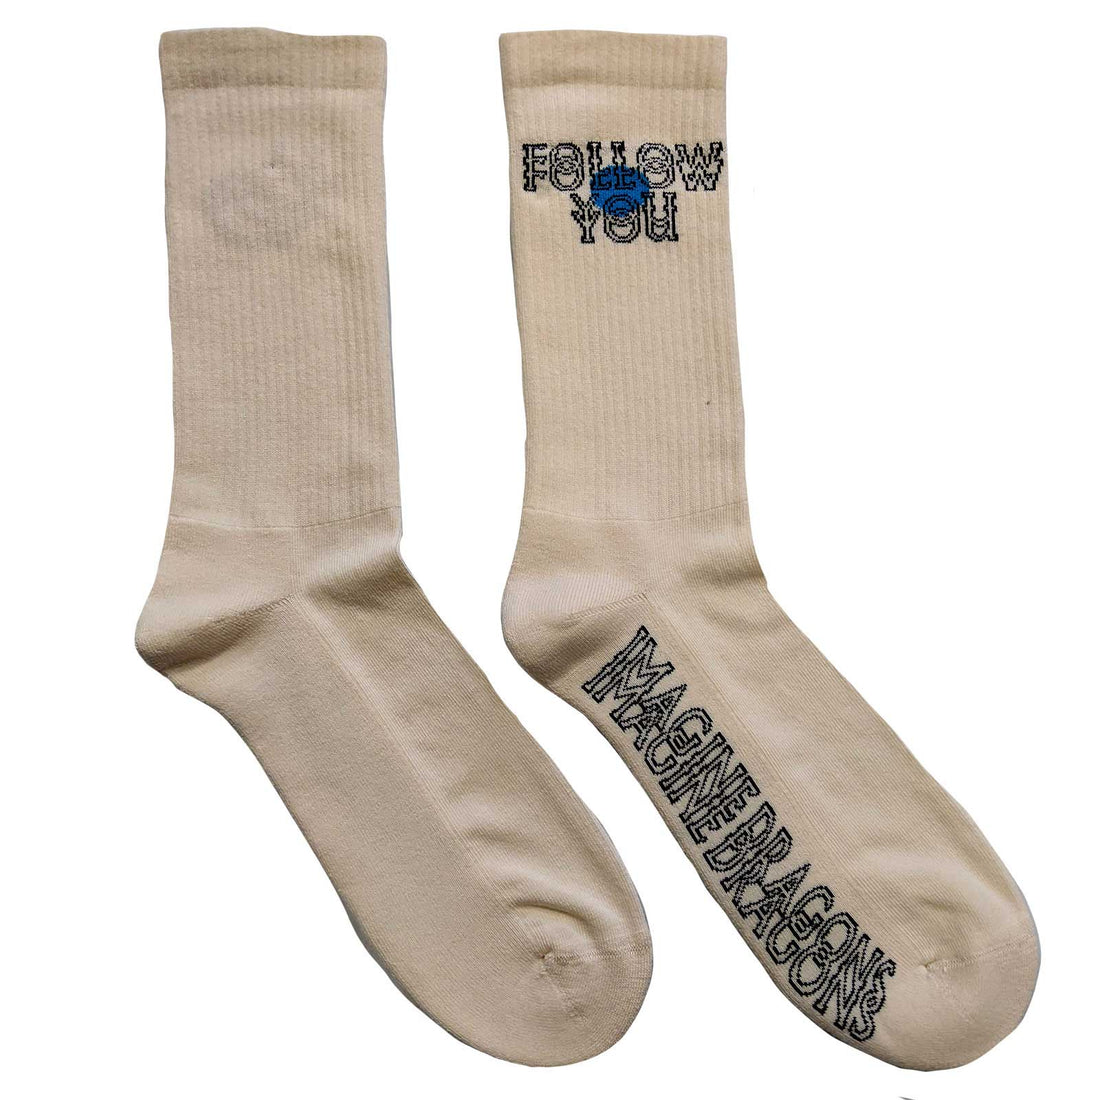 Imagine Dragons Ankle Socks: Follow You (US Size 8 - 10)